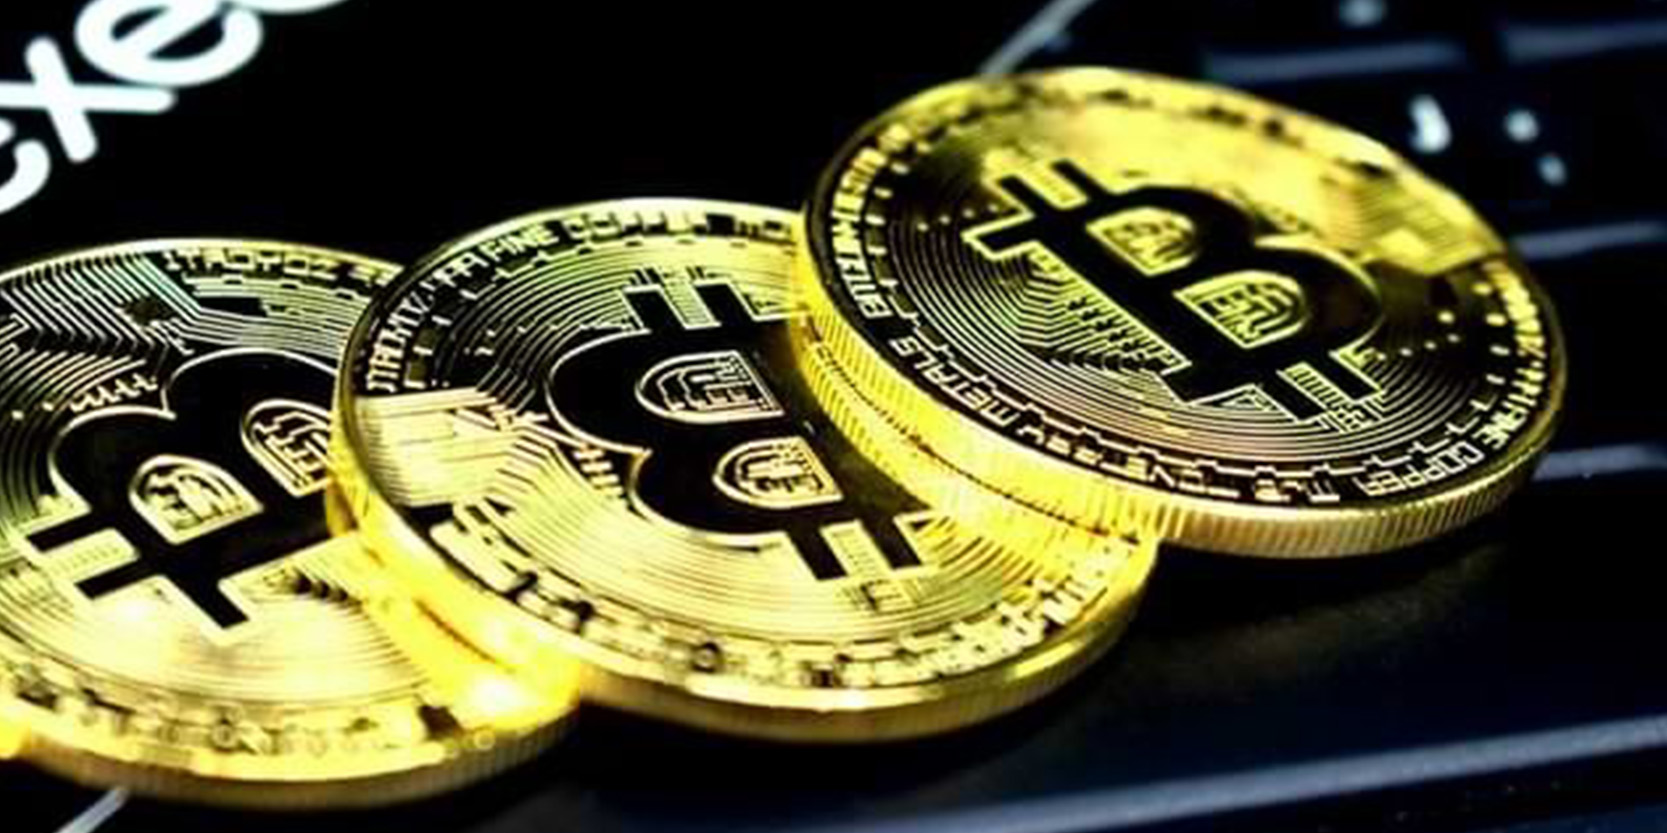 The best cryptocurrency to invest in 2020 is Bitcoin